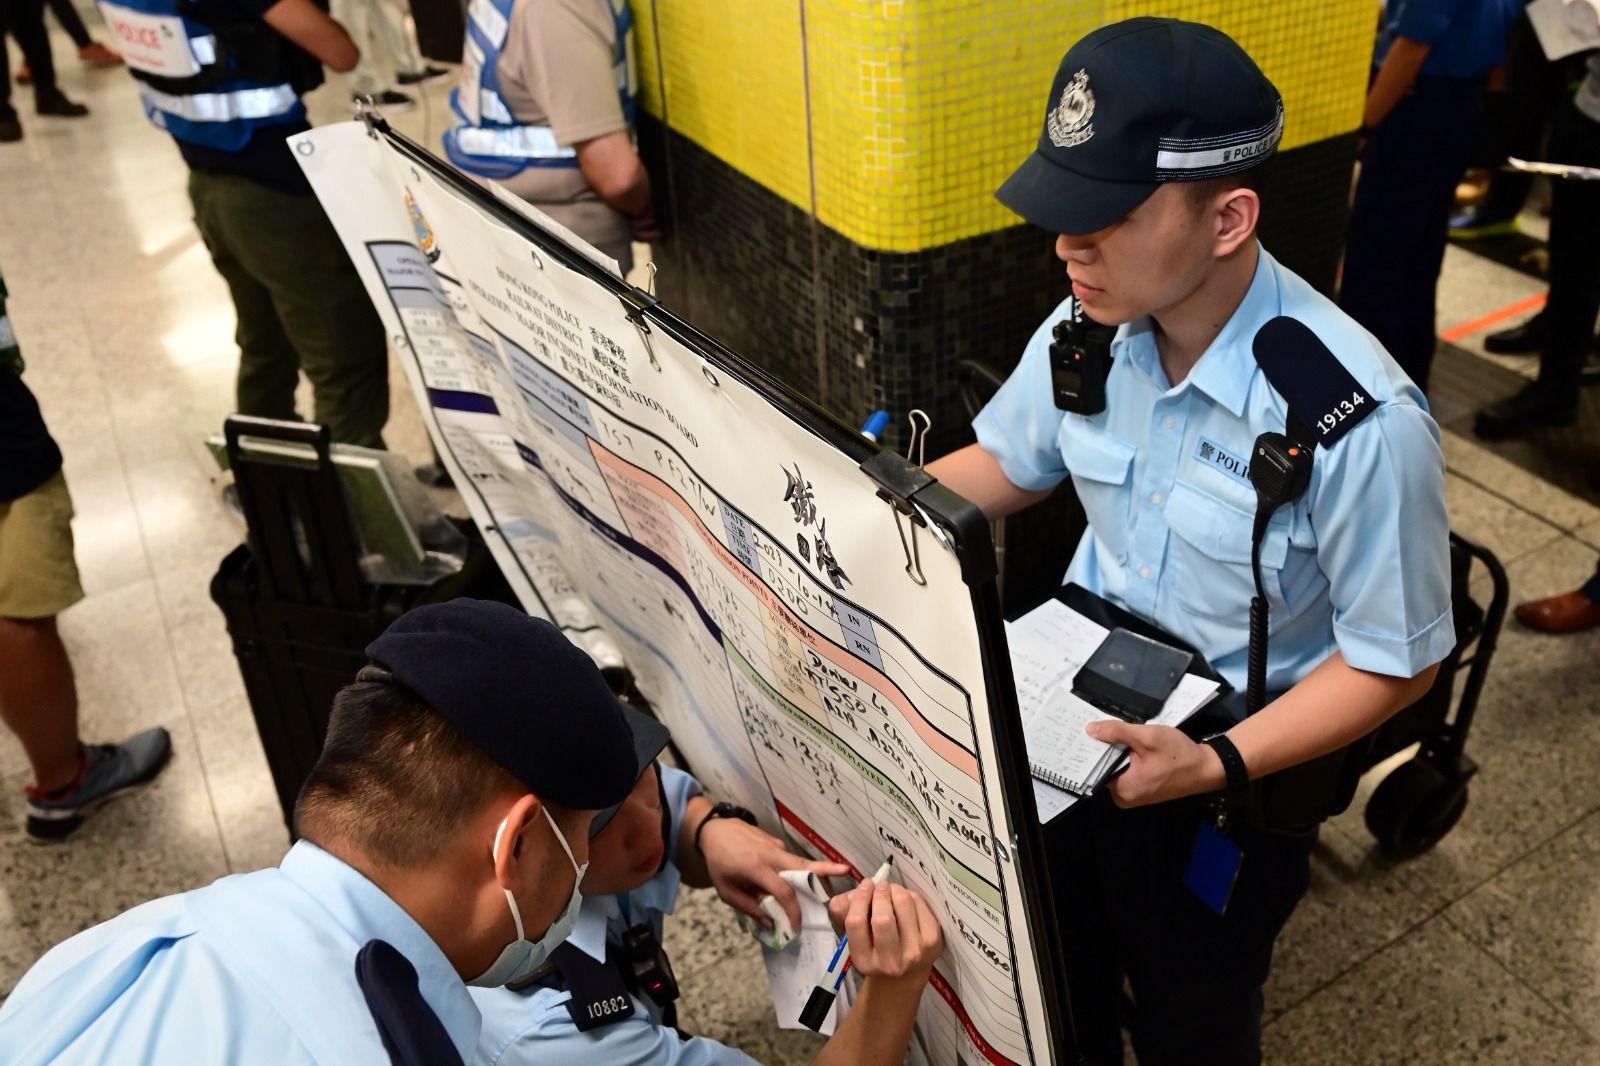 The Hong Kong Police Force (HKPF), together with the MTR Corporation (MTRC), the Fire Services Department (FSD), the Auxiliary Medical Service, St John Ambulance conducted an inter-departmental response exercise in the early hours today (October 14). Picture shows HKPF officers maintain close communication with MTRC staff and FSD officers at a platform to keep track on the latest situation of the incidents.